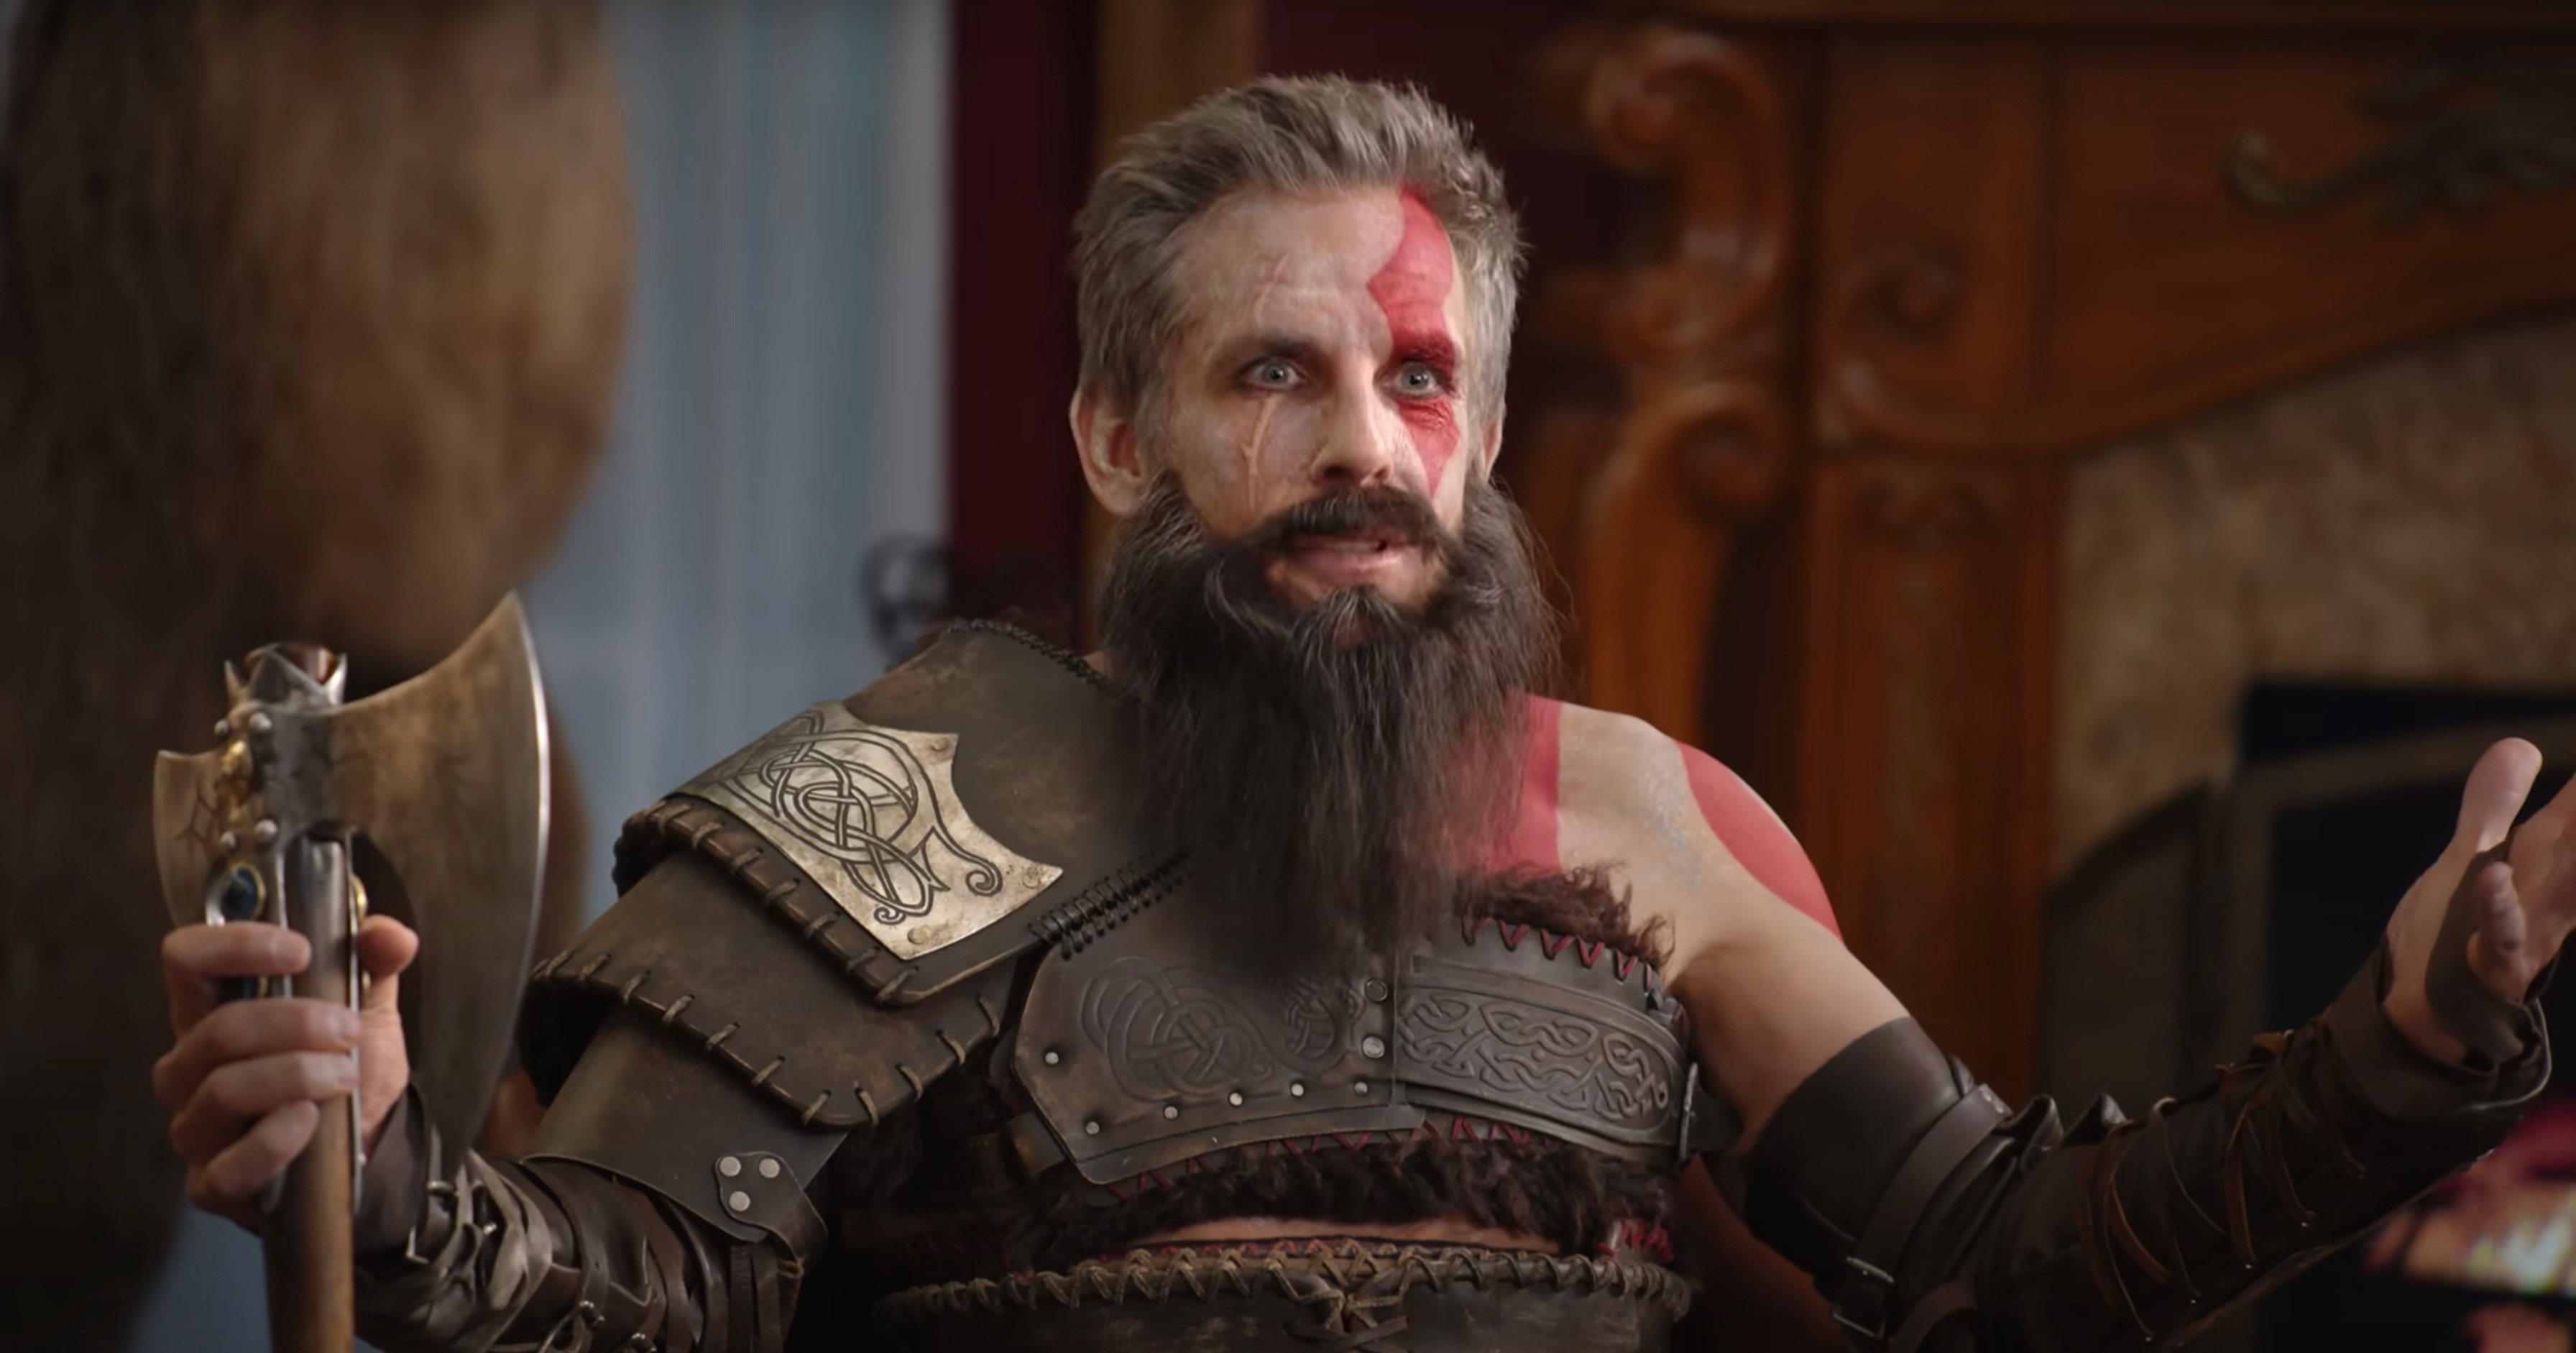 God of War Ragnarok's graphics modes on PS5 and PS4, explained - Polygon